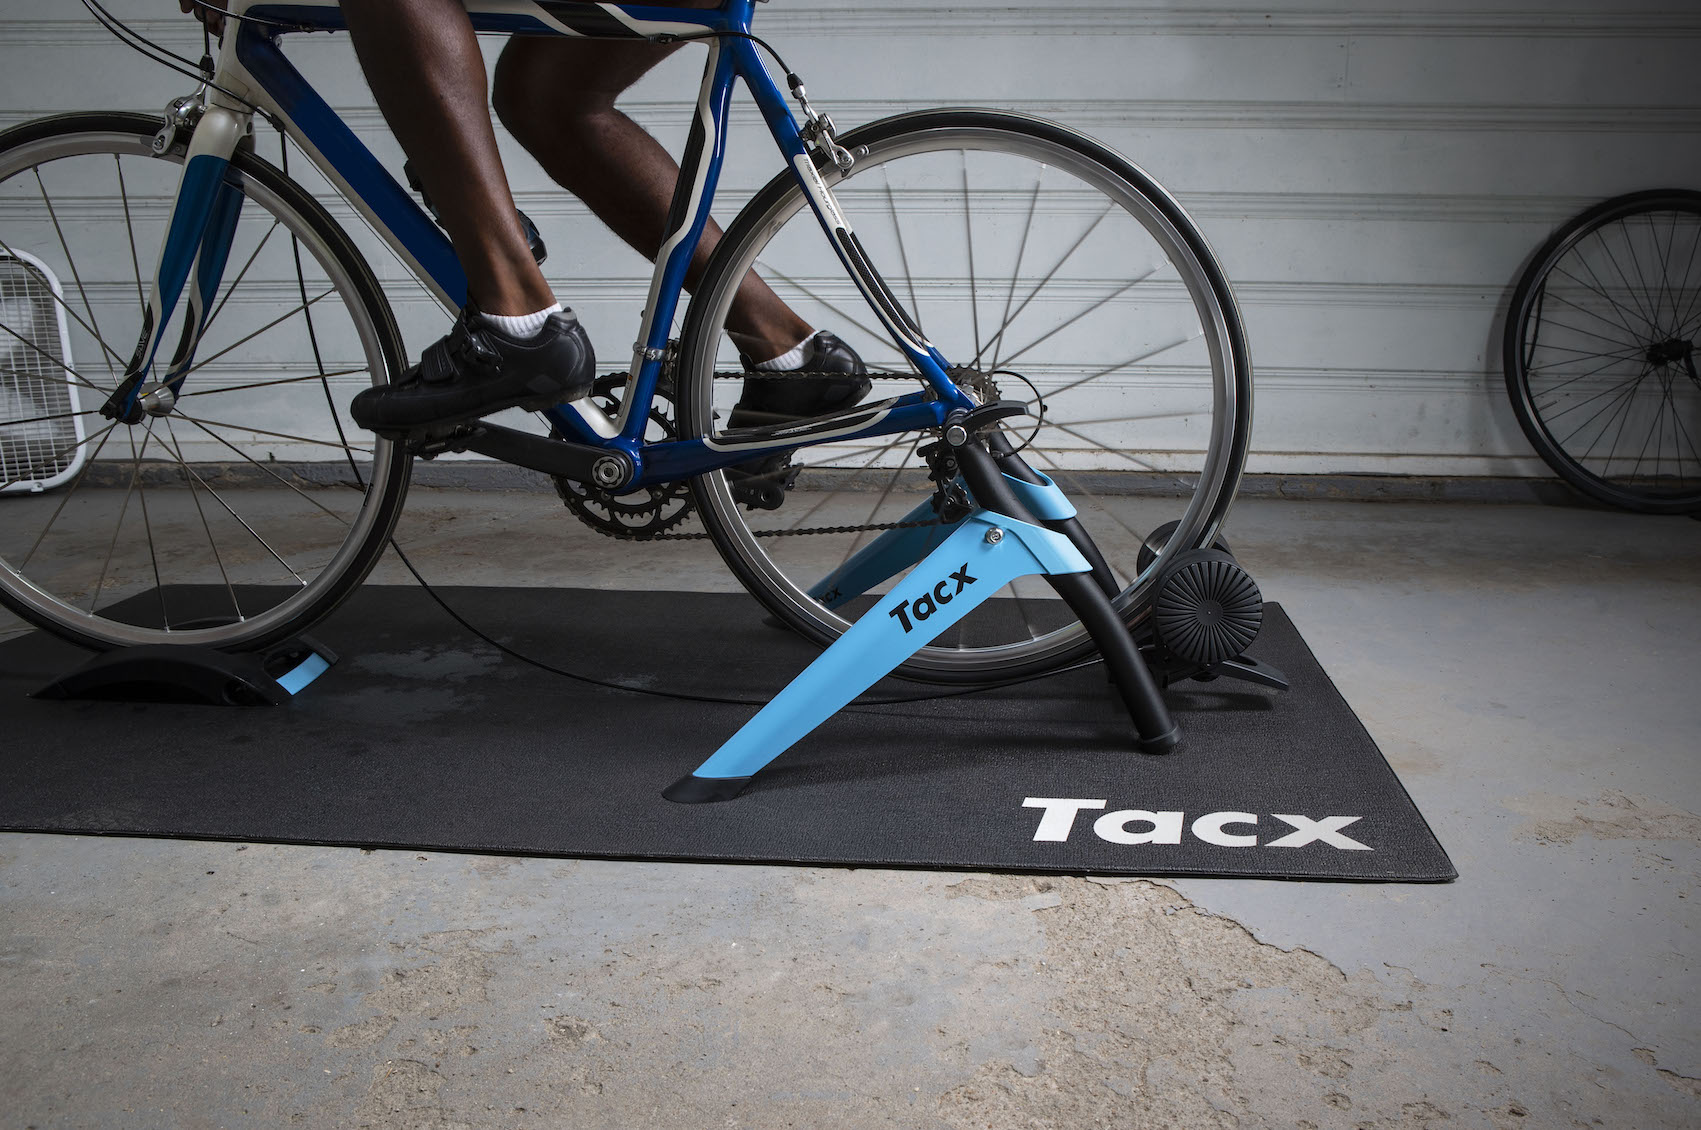 Garmin releases the Boost, an affordable indoor training - Cycling Magazine